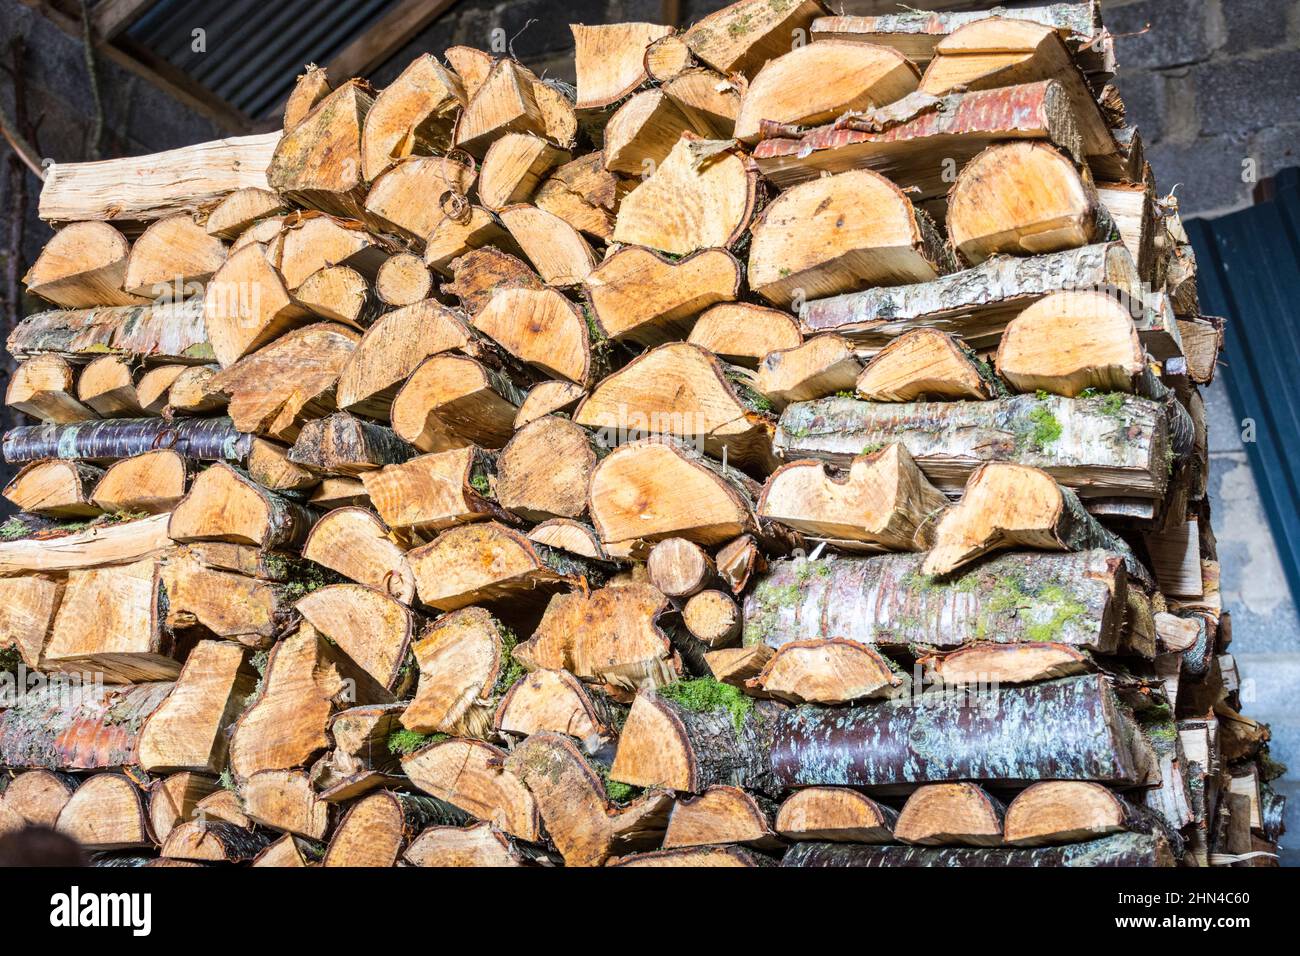 Woodpile. Logs cut for fuel in wood burning stove. County Donegal, Ireland Stock Photo